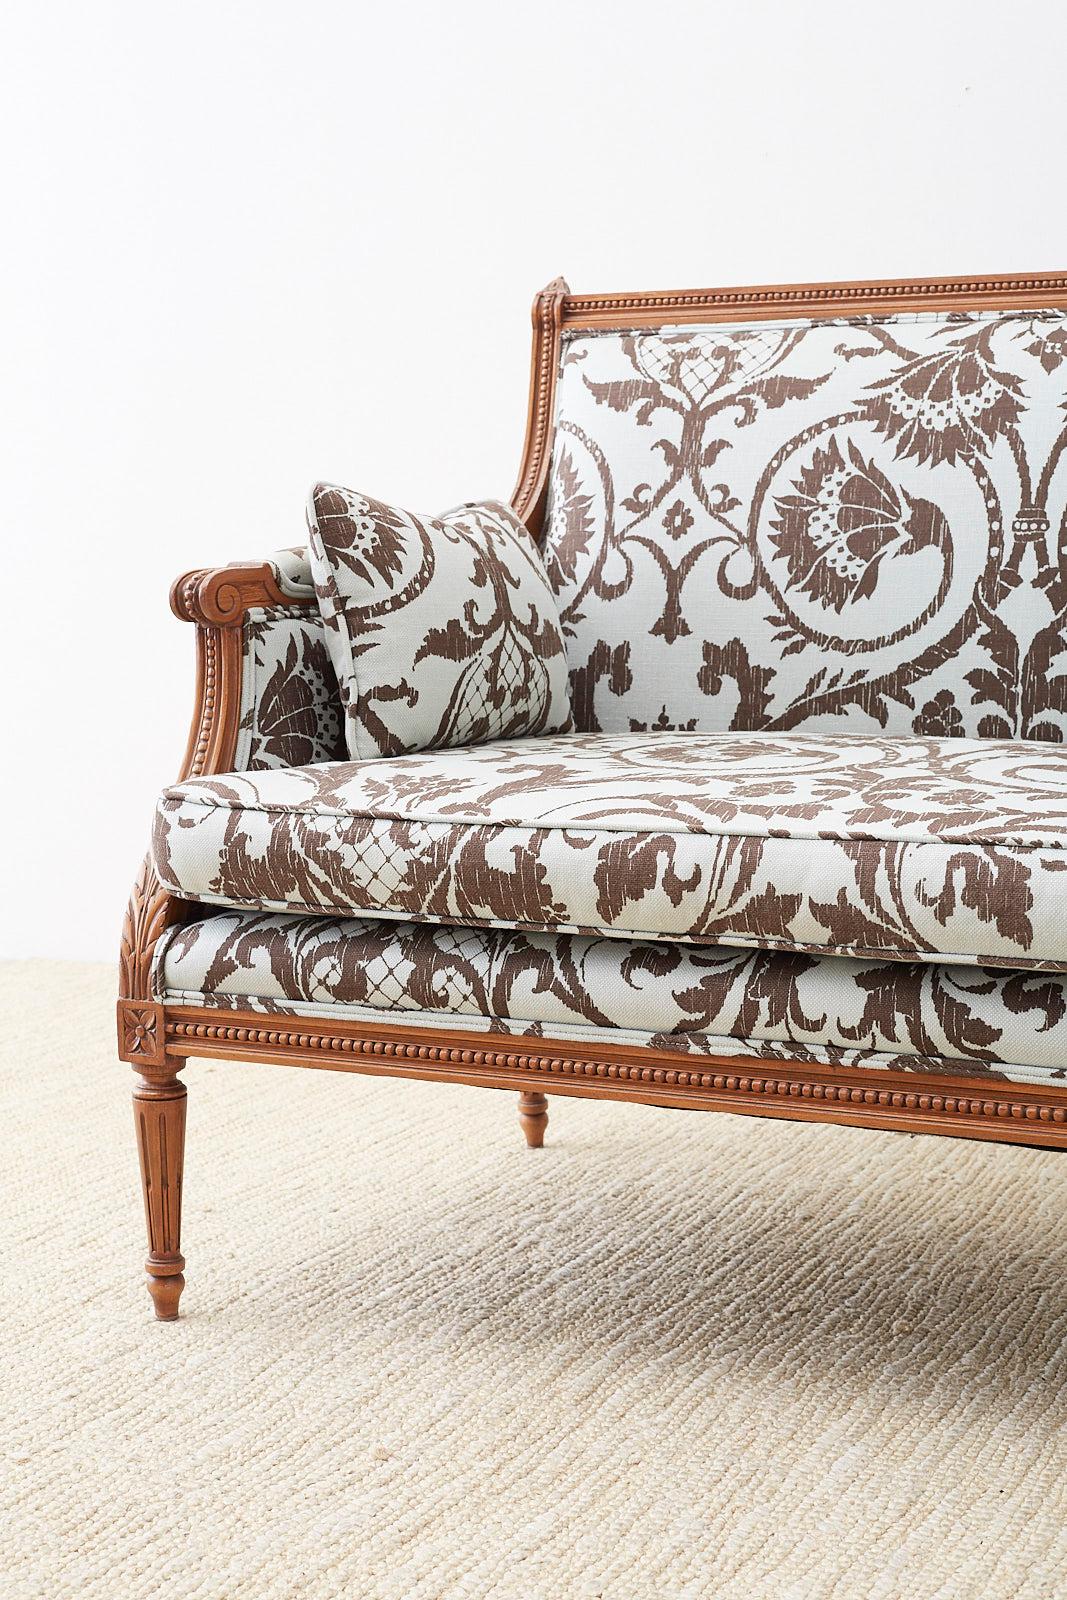 Hand-Crafted Louis XVI Style Linen Upholstered Settee or Canape